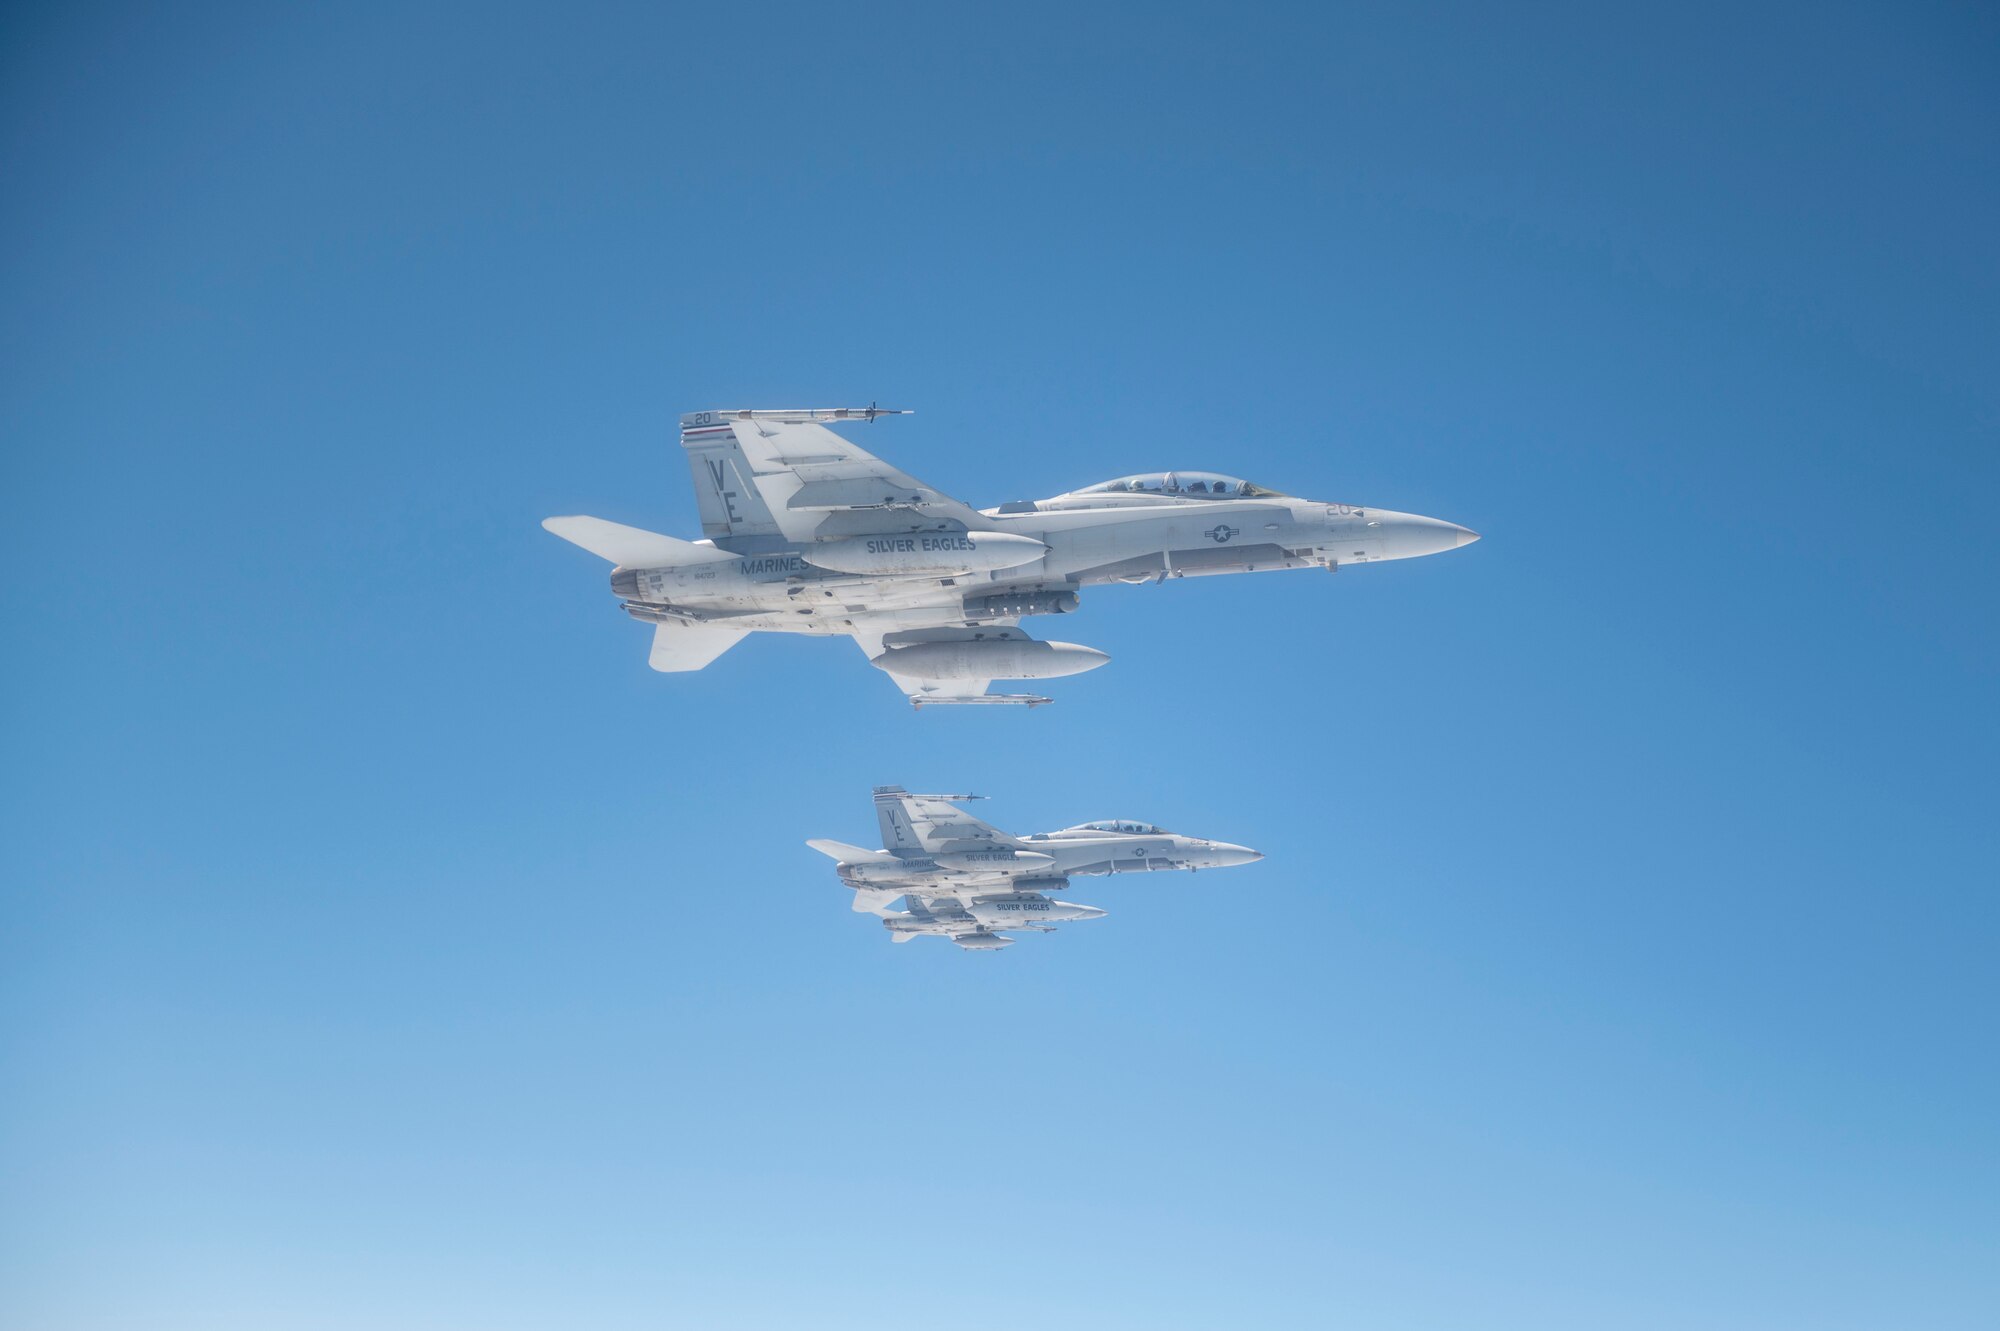 F/A-18s assigned to Marine Fighter Attack Squadron 115 “Silver Eagles” from Marine Corps Air Station Beaufort, South Carolina, fly in formation during an aerial refueling operation off the coast of North Carolina following Exercise Razor Talon May 19, 2022. Razor Talon is the premiere training initiative that offers joint integration opportunities for the Marine Corps, Air Force, Navy, Army and Coast Guard. (U.S. Air Force photo by Senior Airman Kevin Holloway)